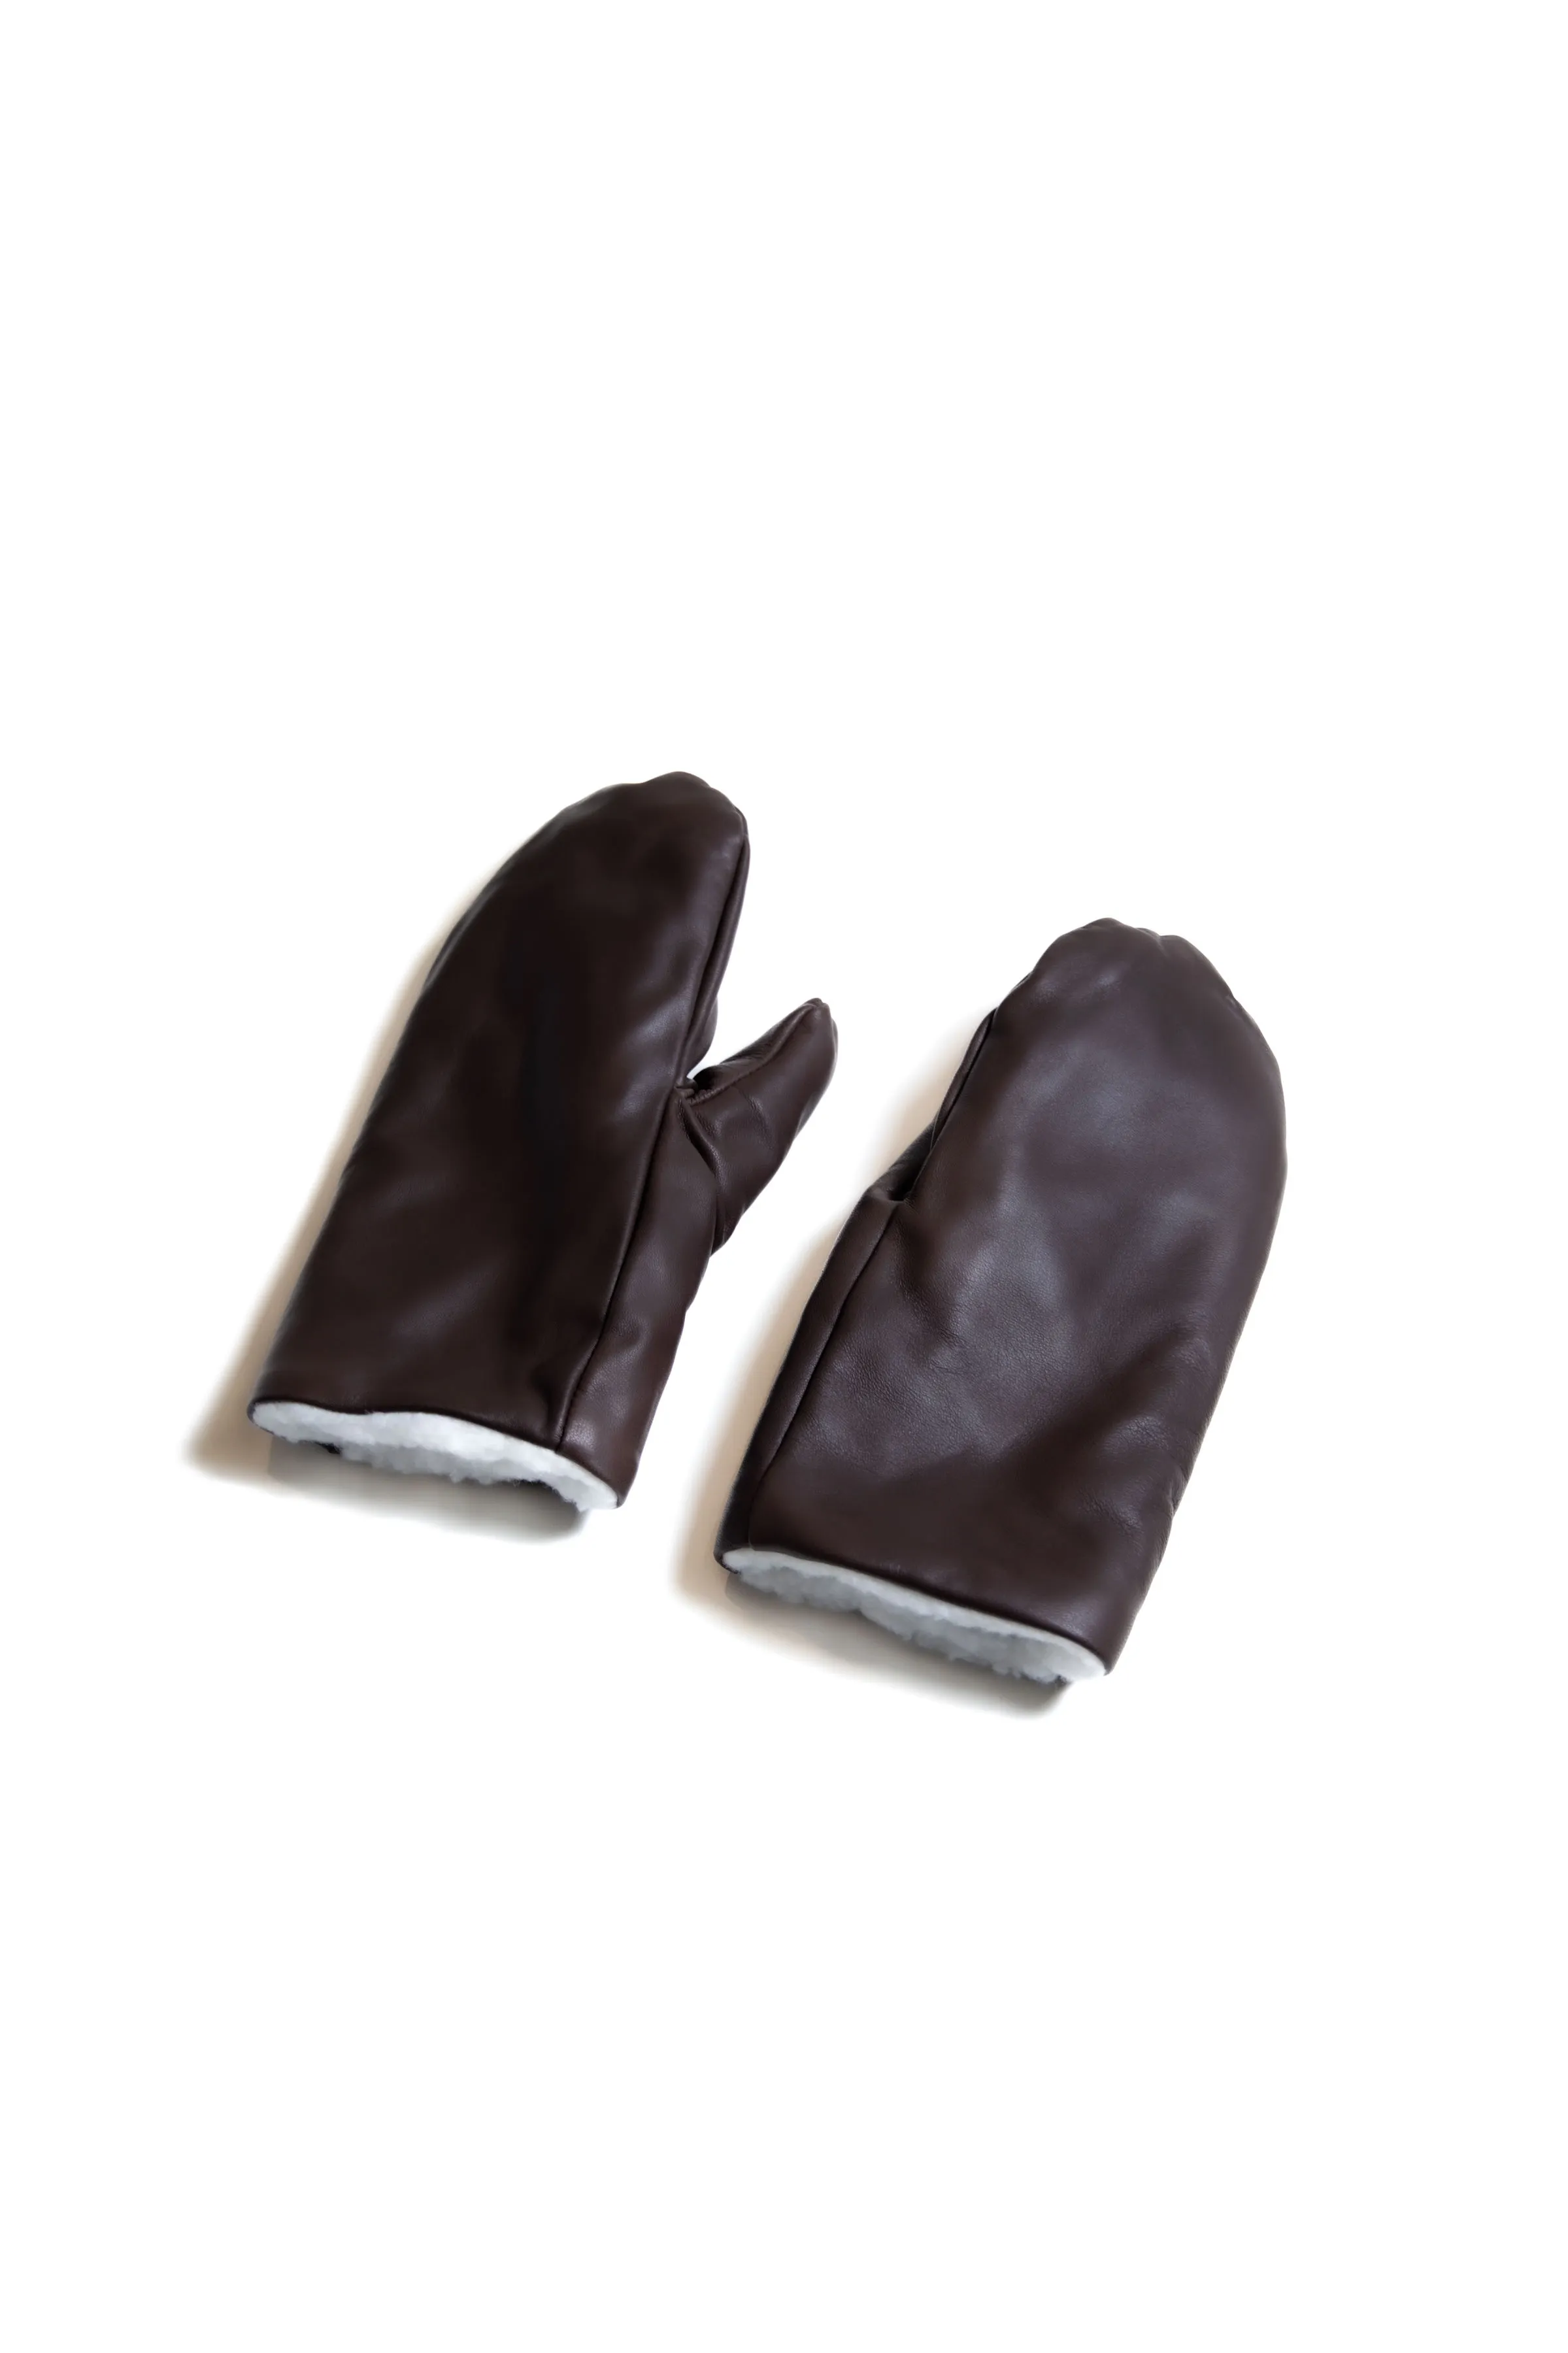 Leather mittens by Milo & Dexter